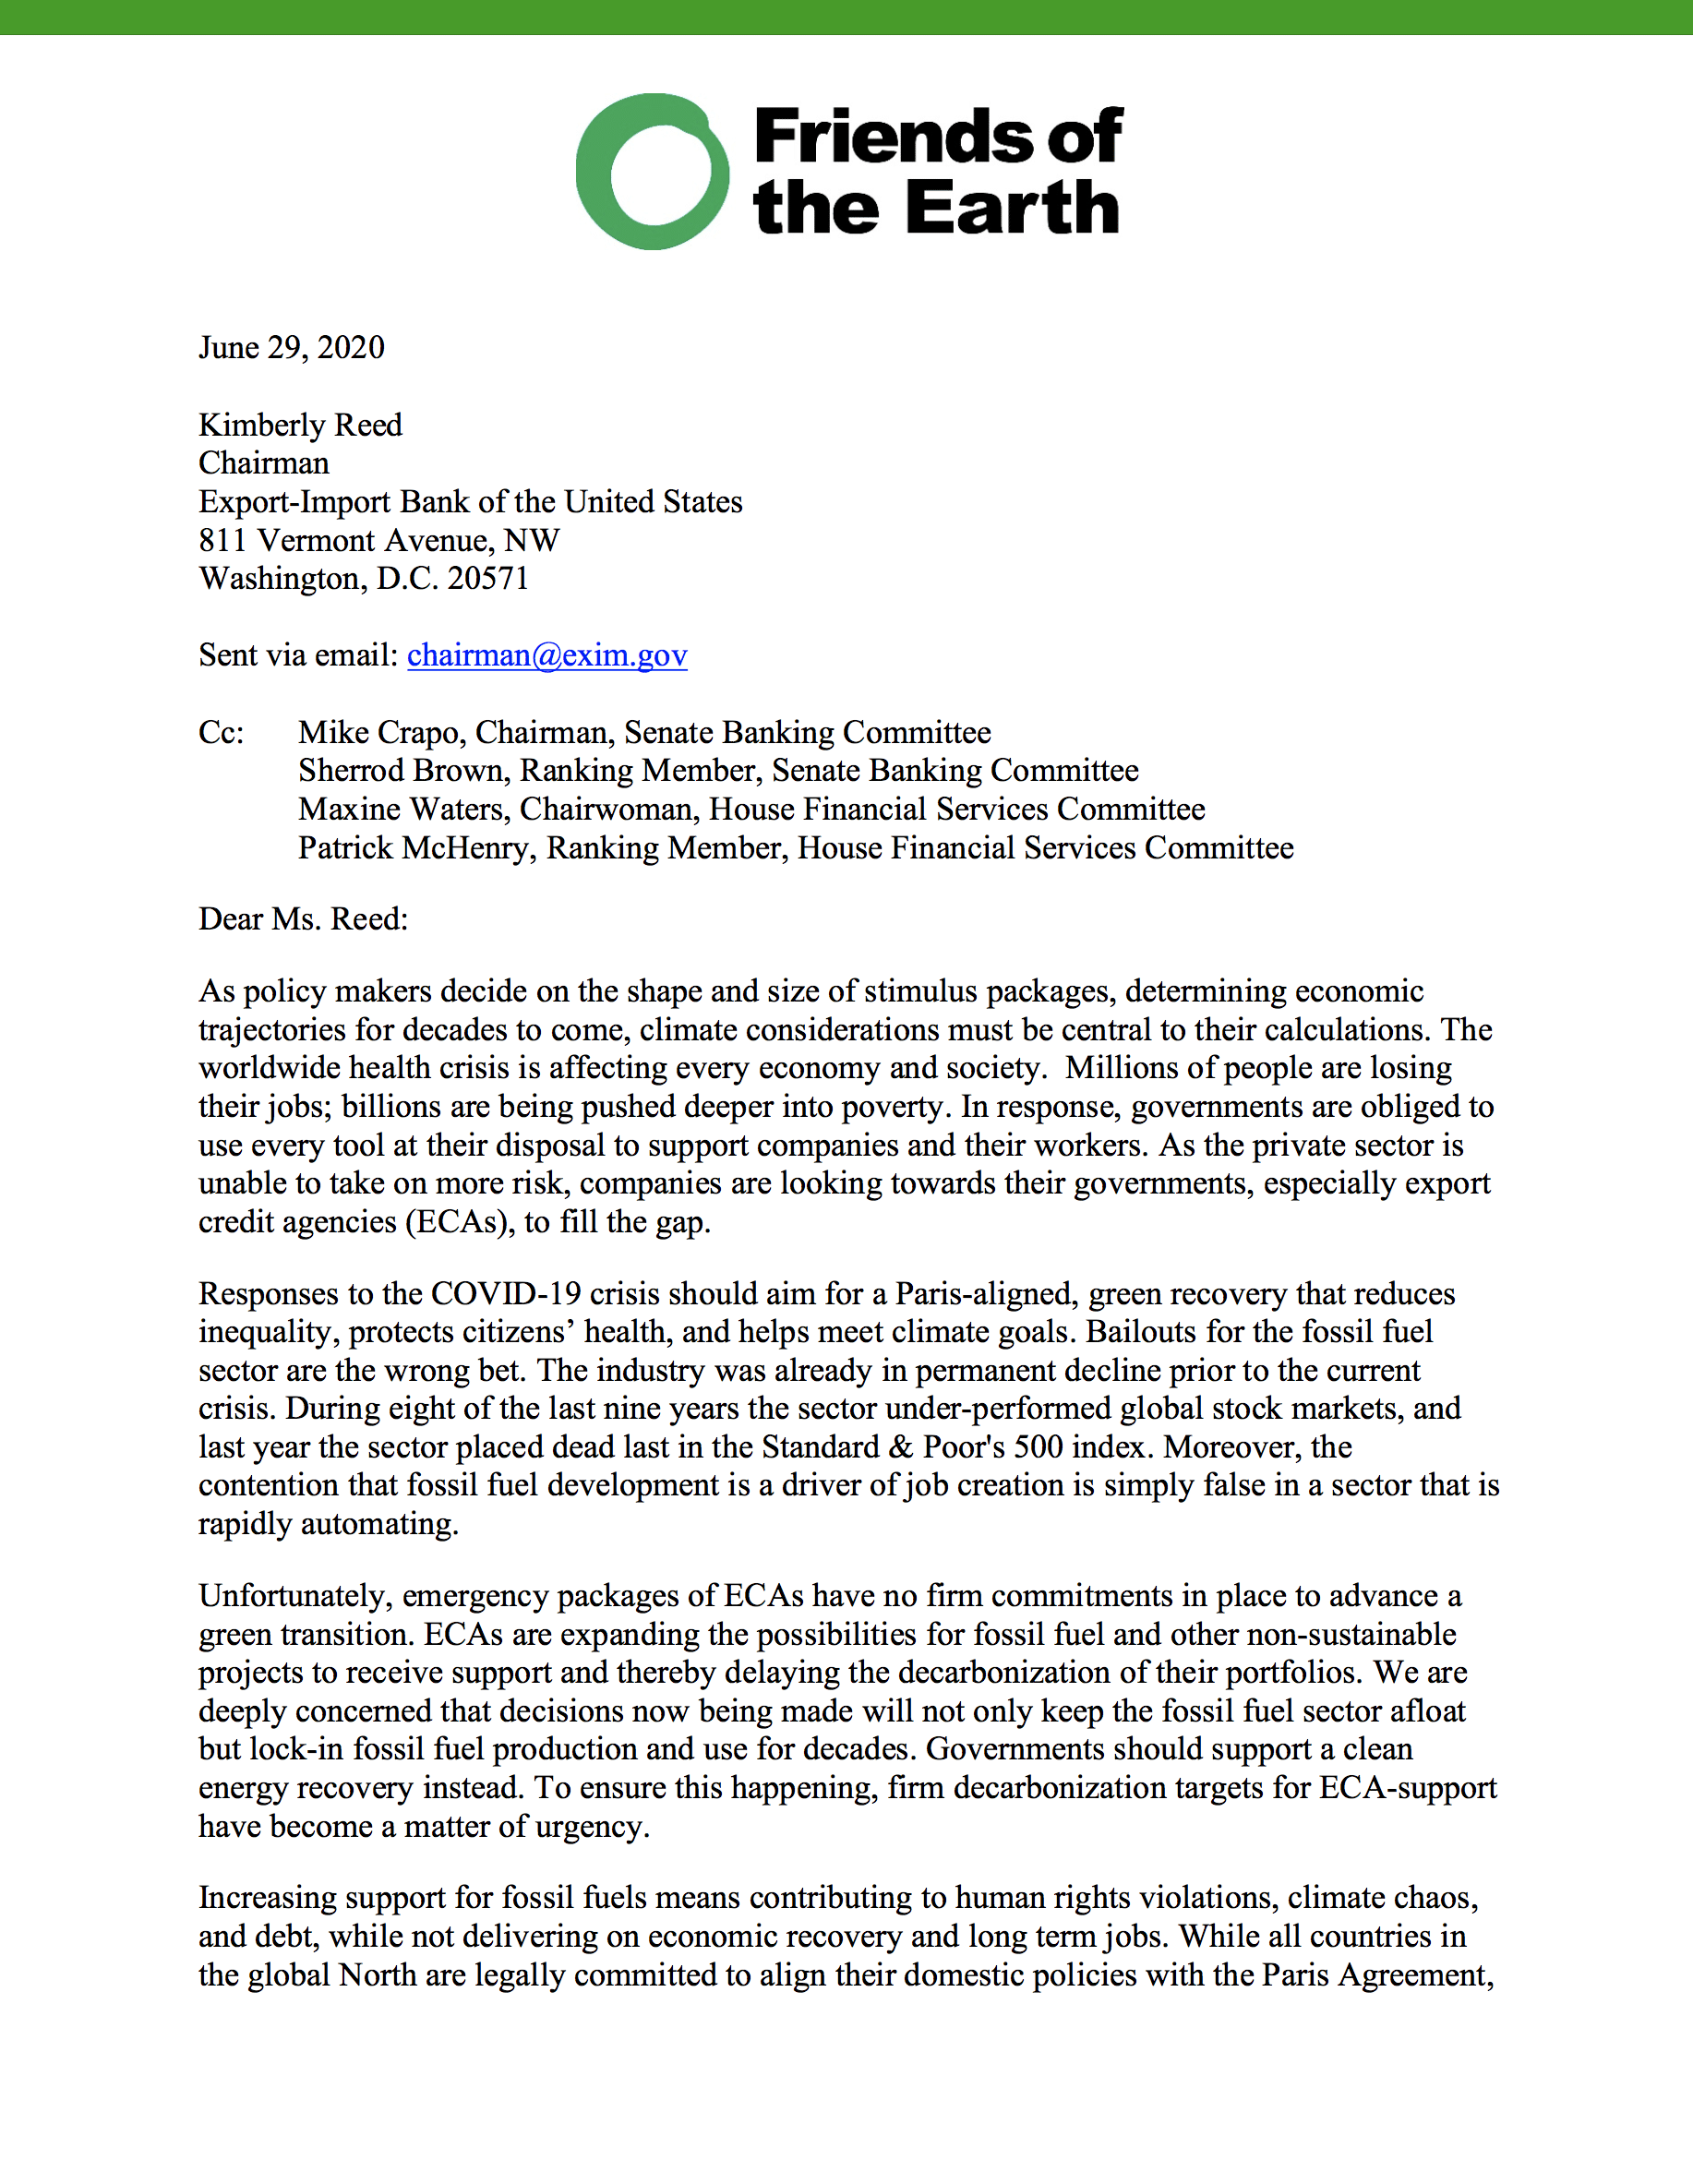 Letter to Ex-Im Bank on COVID-19